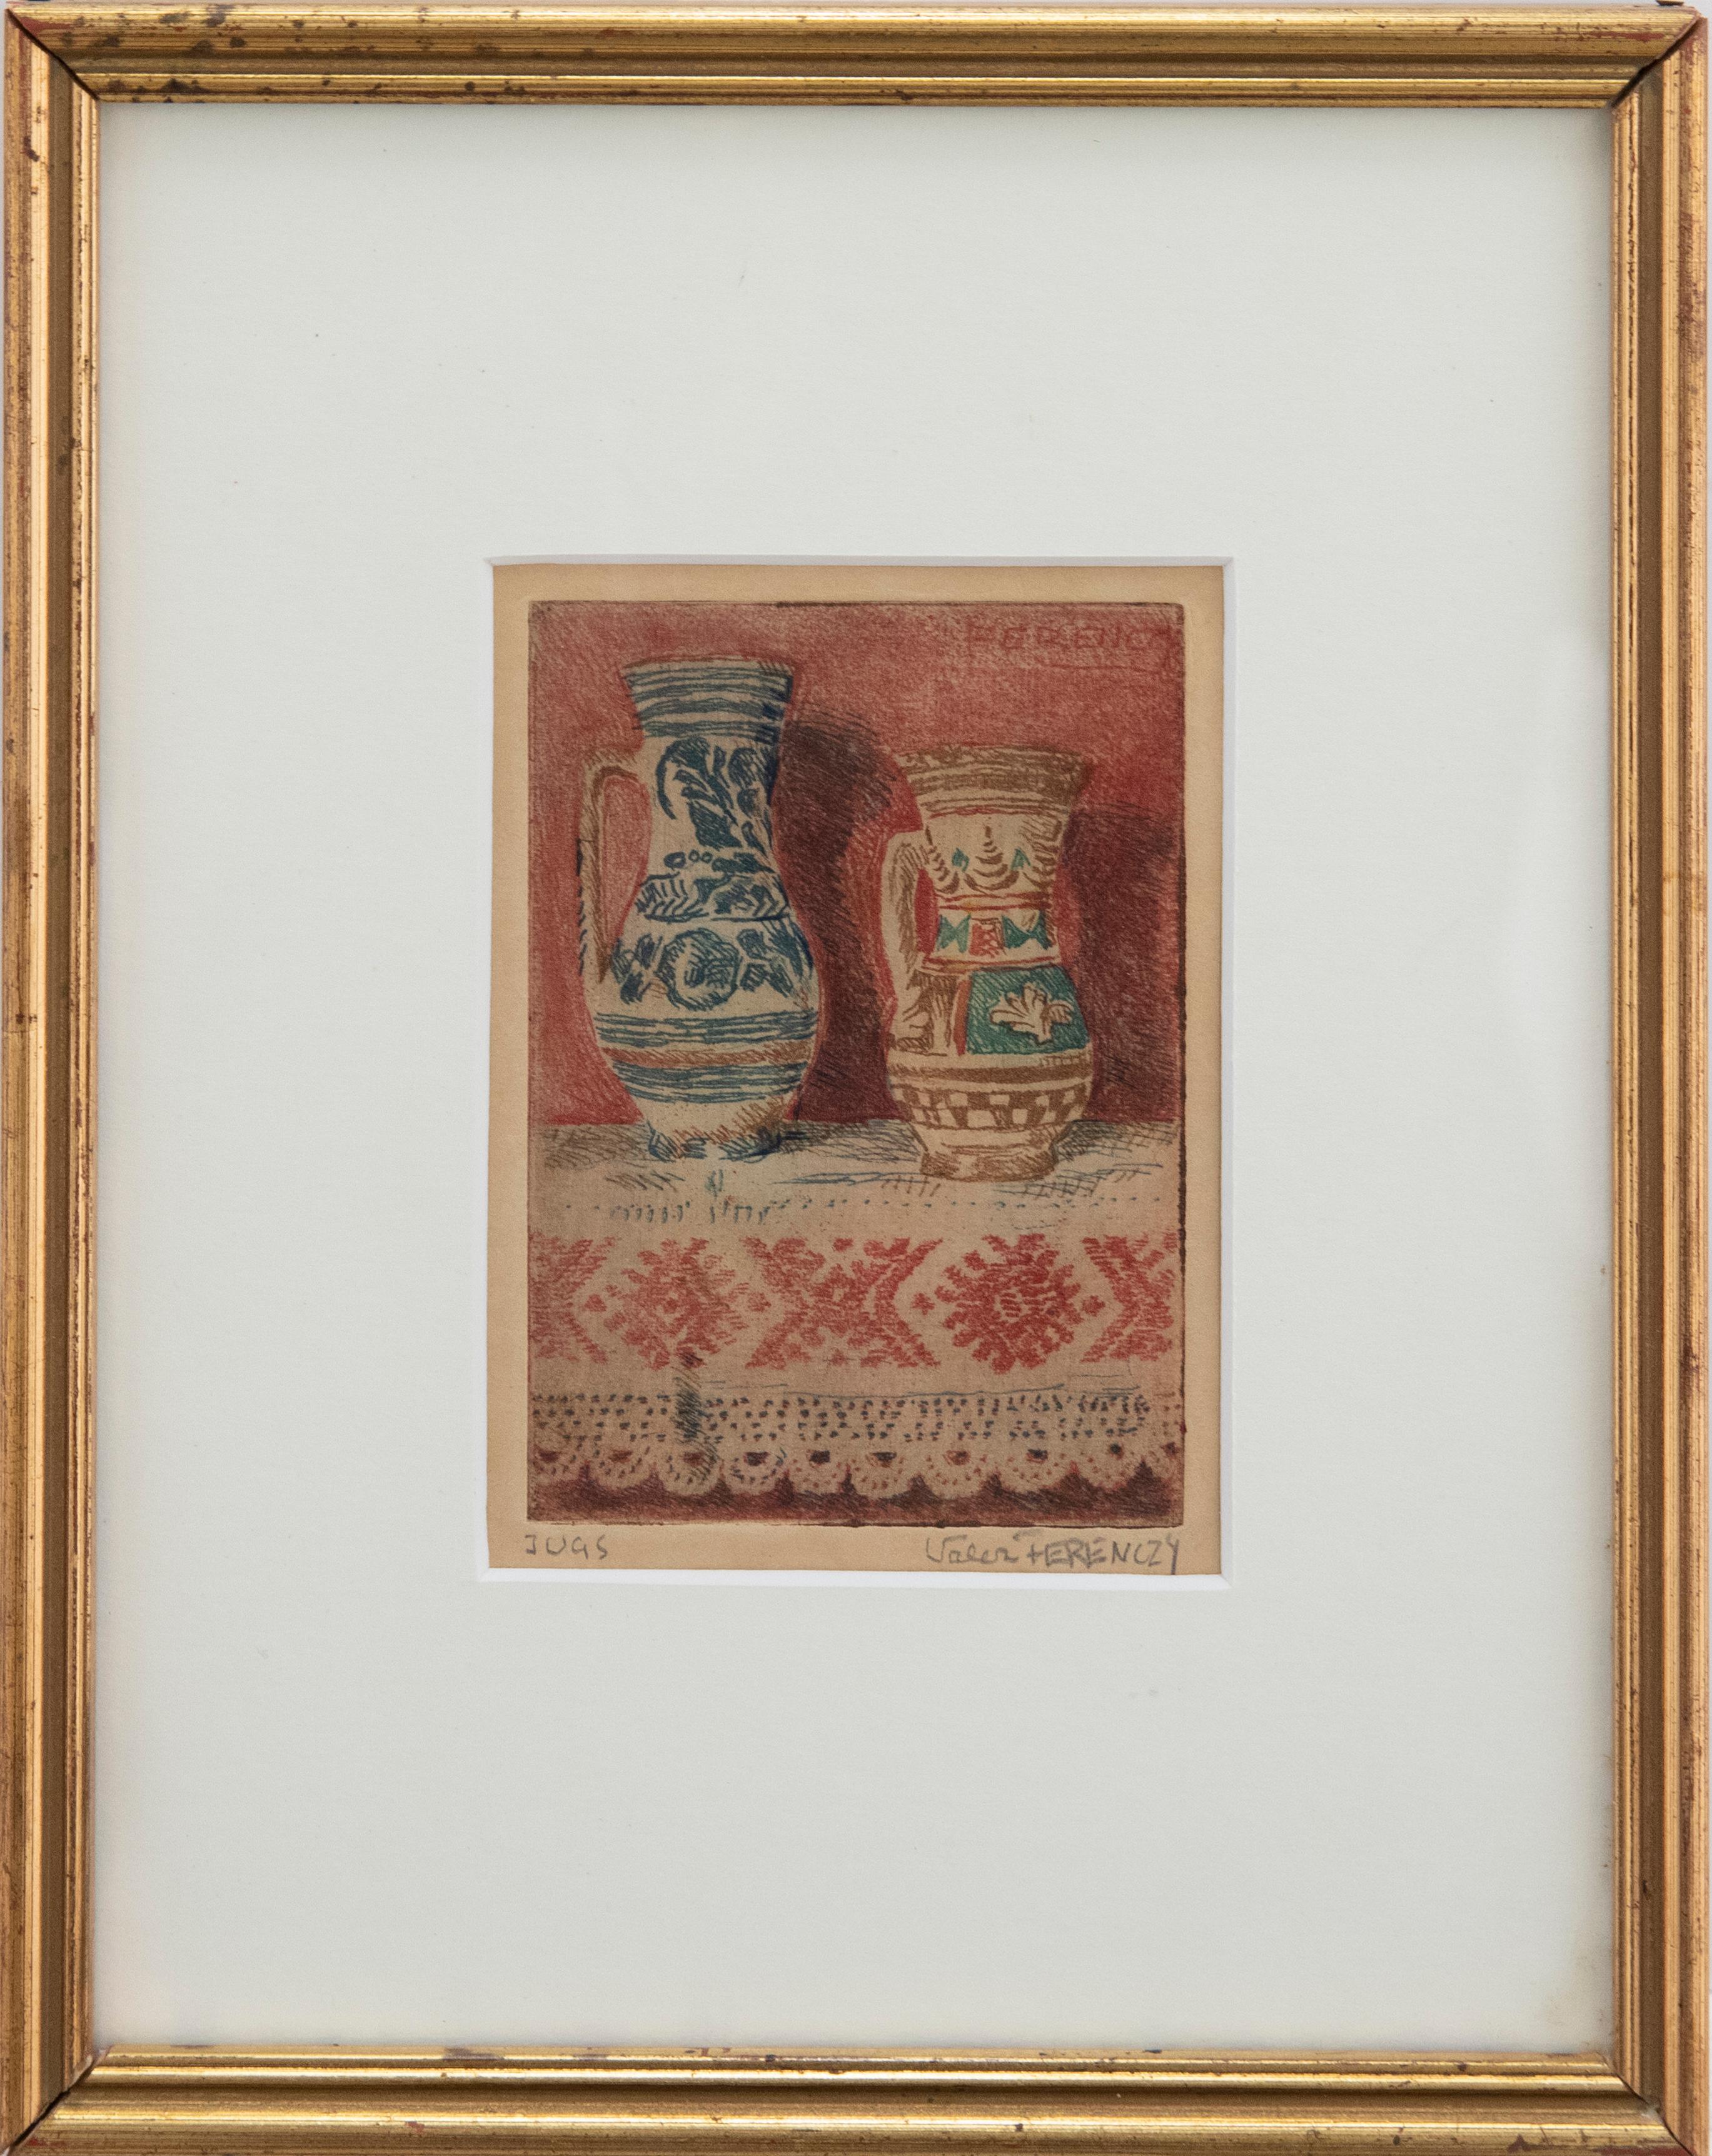 A charming coloured etching of two decorative jugs, placed upon a delicate tablecloth. Both textile and ceramic objects have been elegantly depicted with exquisite surface pattern and detail. Signed by the artist in plate (upper right corner) and to